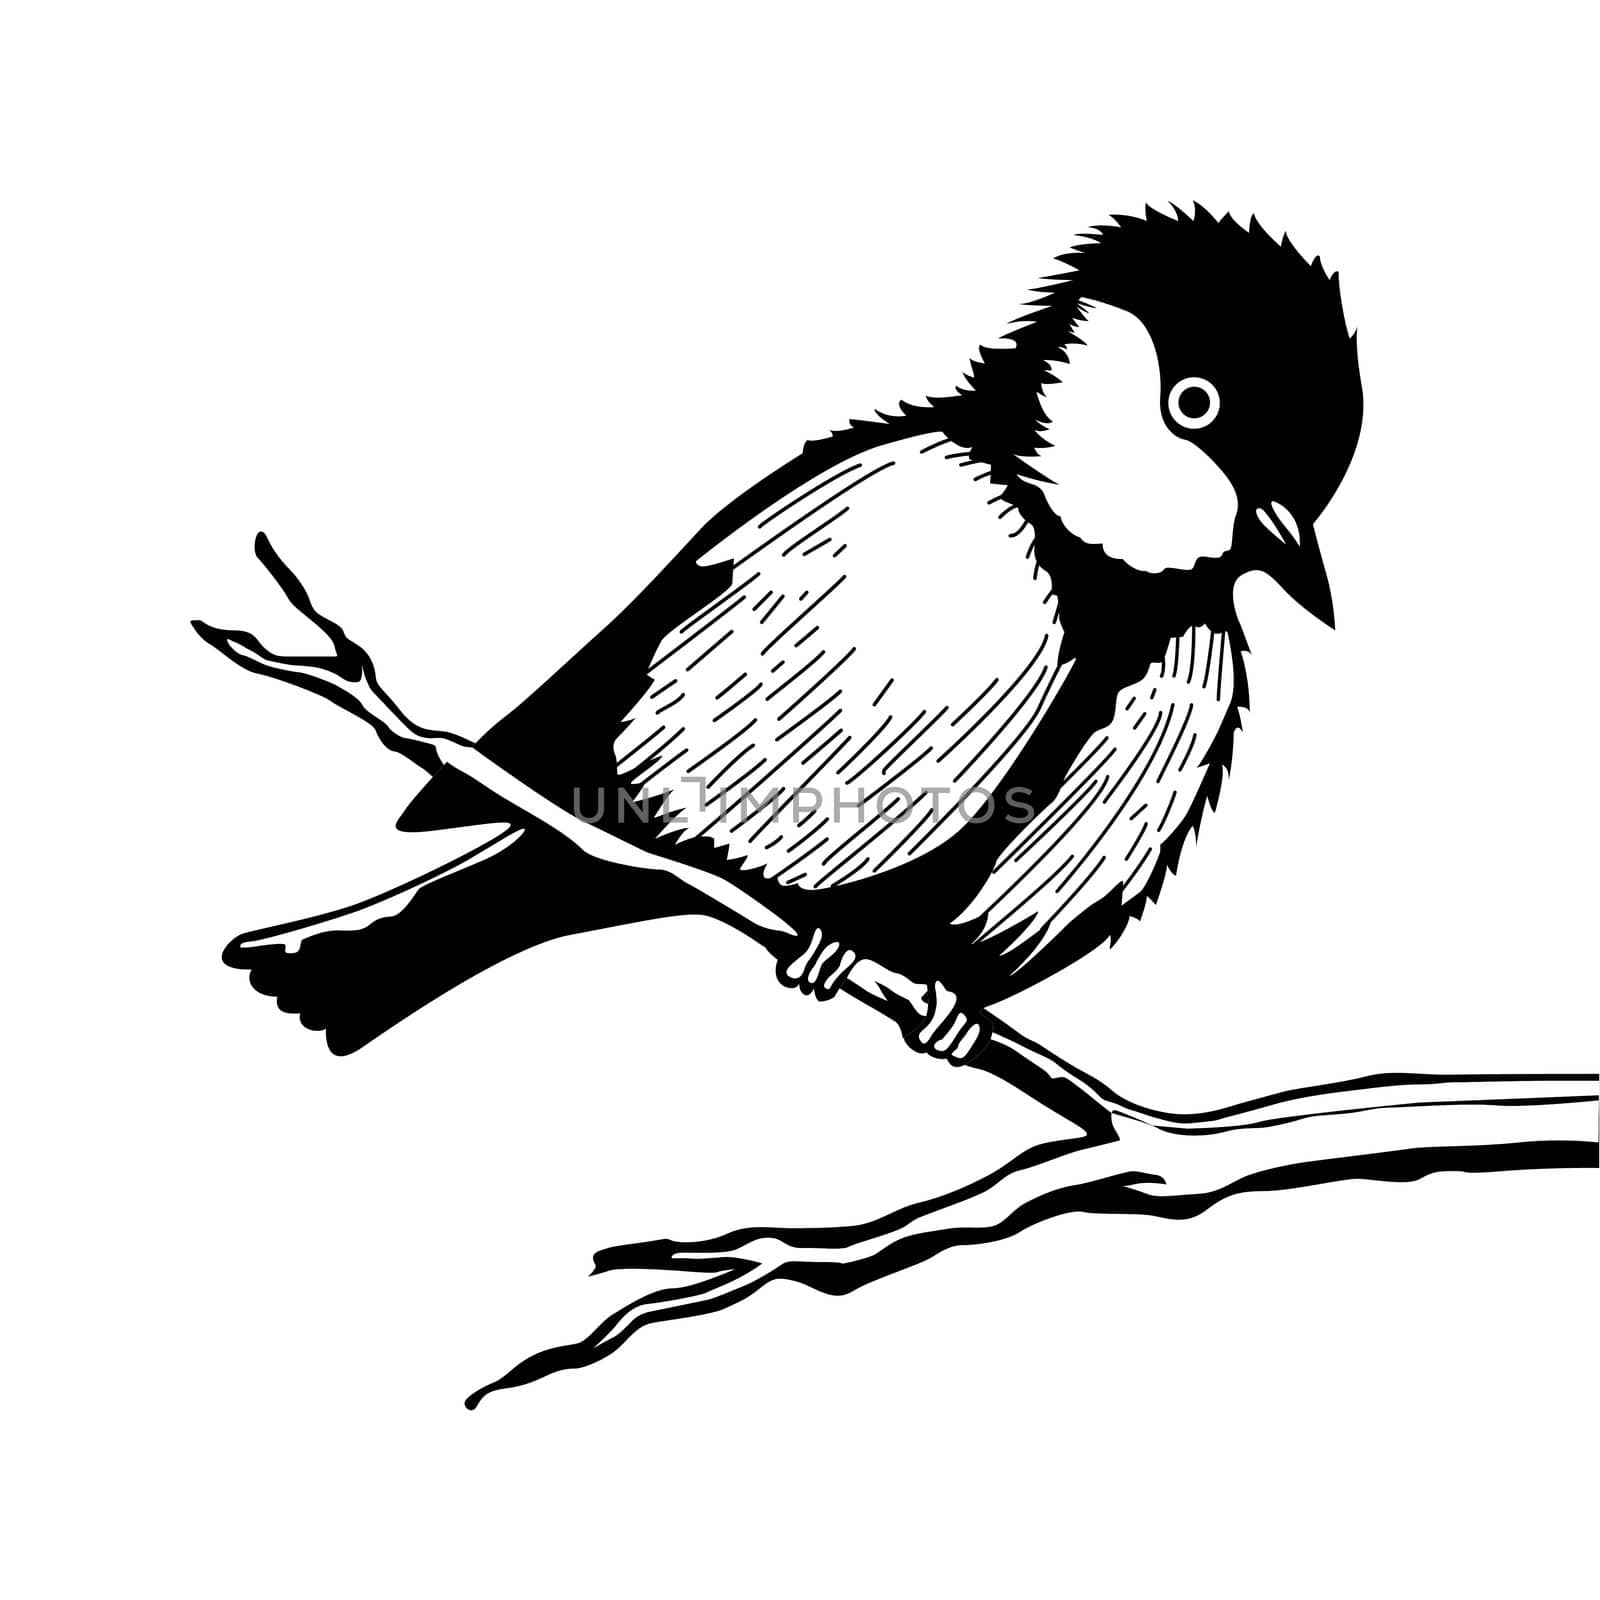 bird on branch silhouette on white background, vector illustrati by basel101658